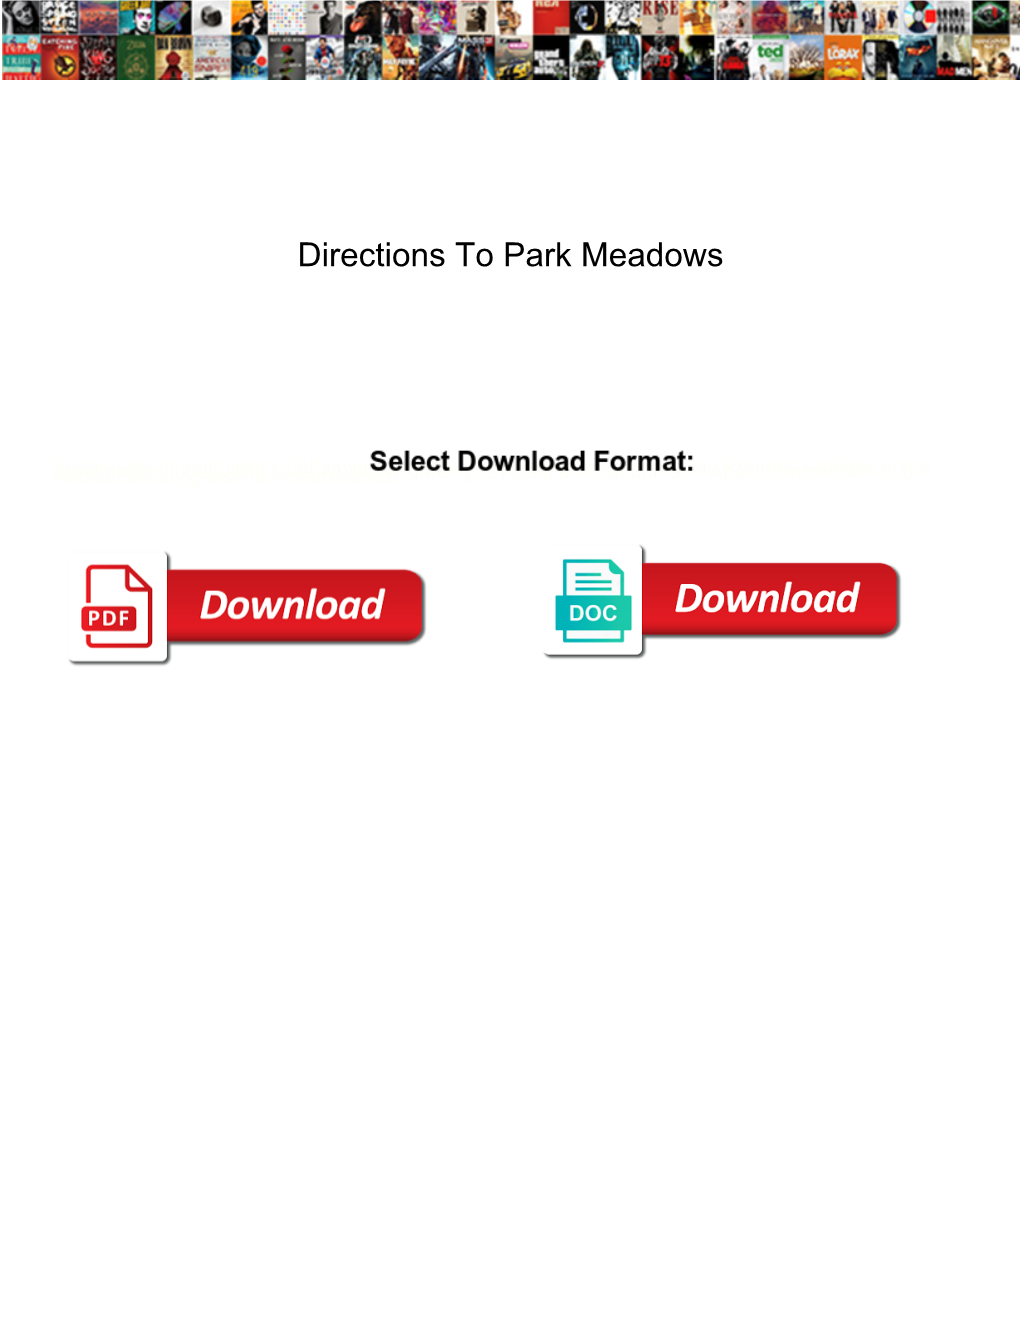 Directions to Park Meadows